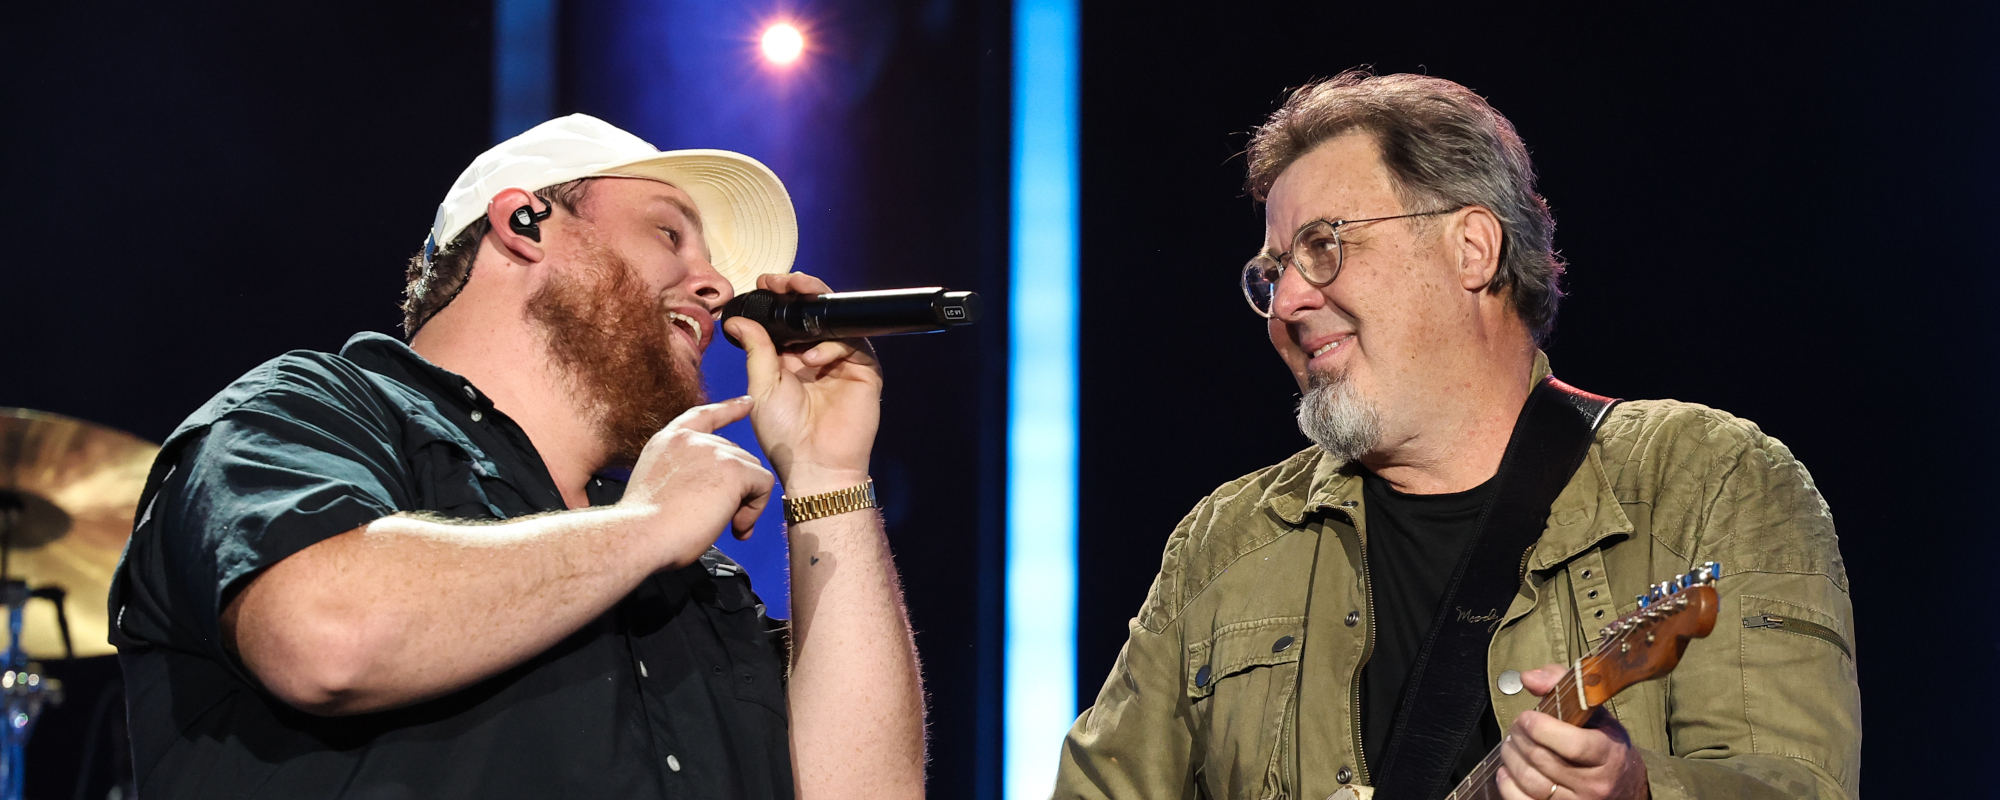 Luke Combs and Vince Gill Share CMA Fest Stage for Rocking Performance of “One More Last Chance” (Watch)